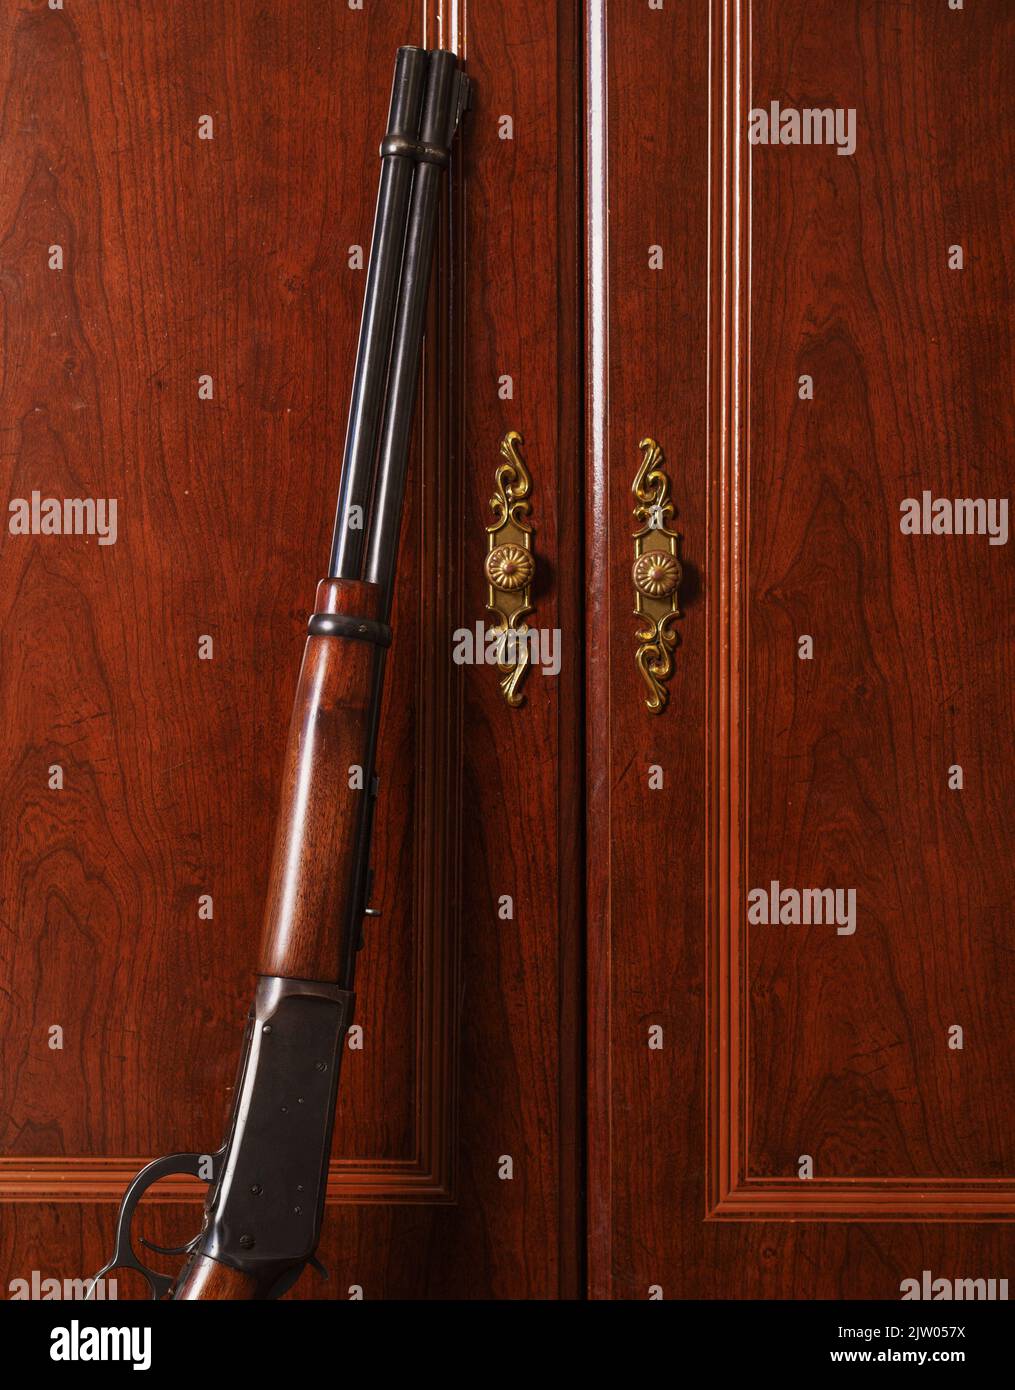 Classic lever-action rifle leaning against ornate dresser cabinet door Stock Photo